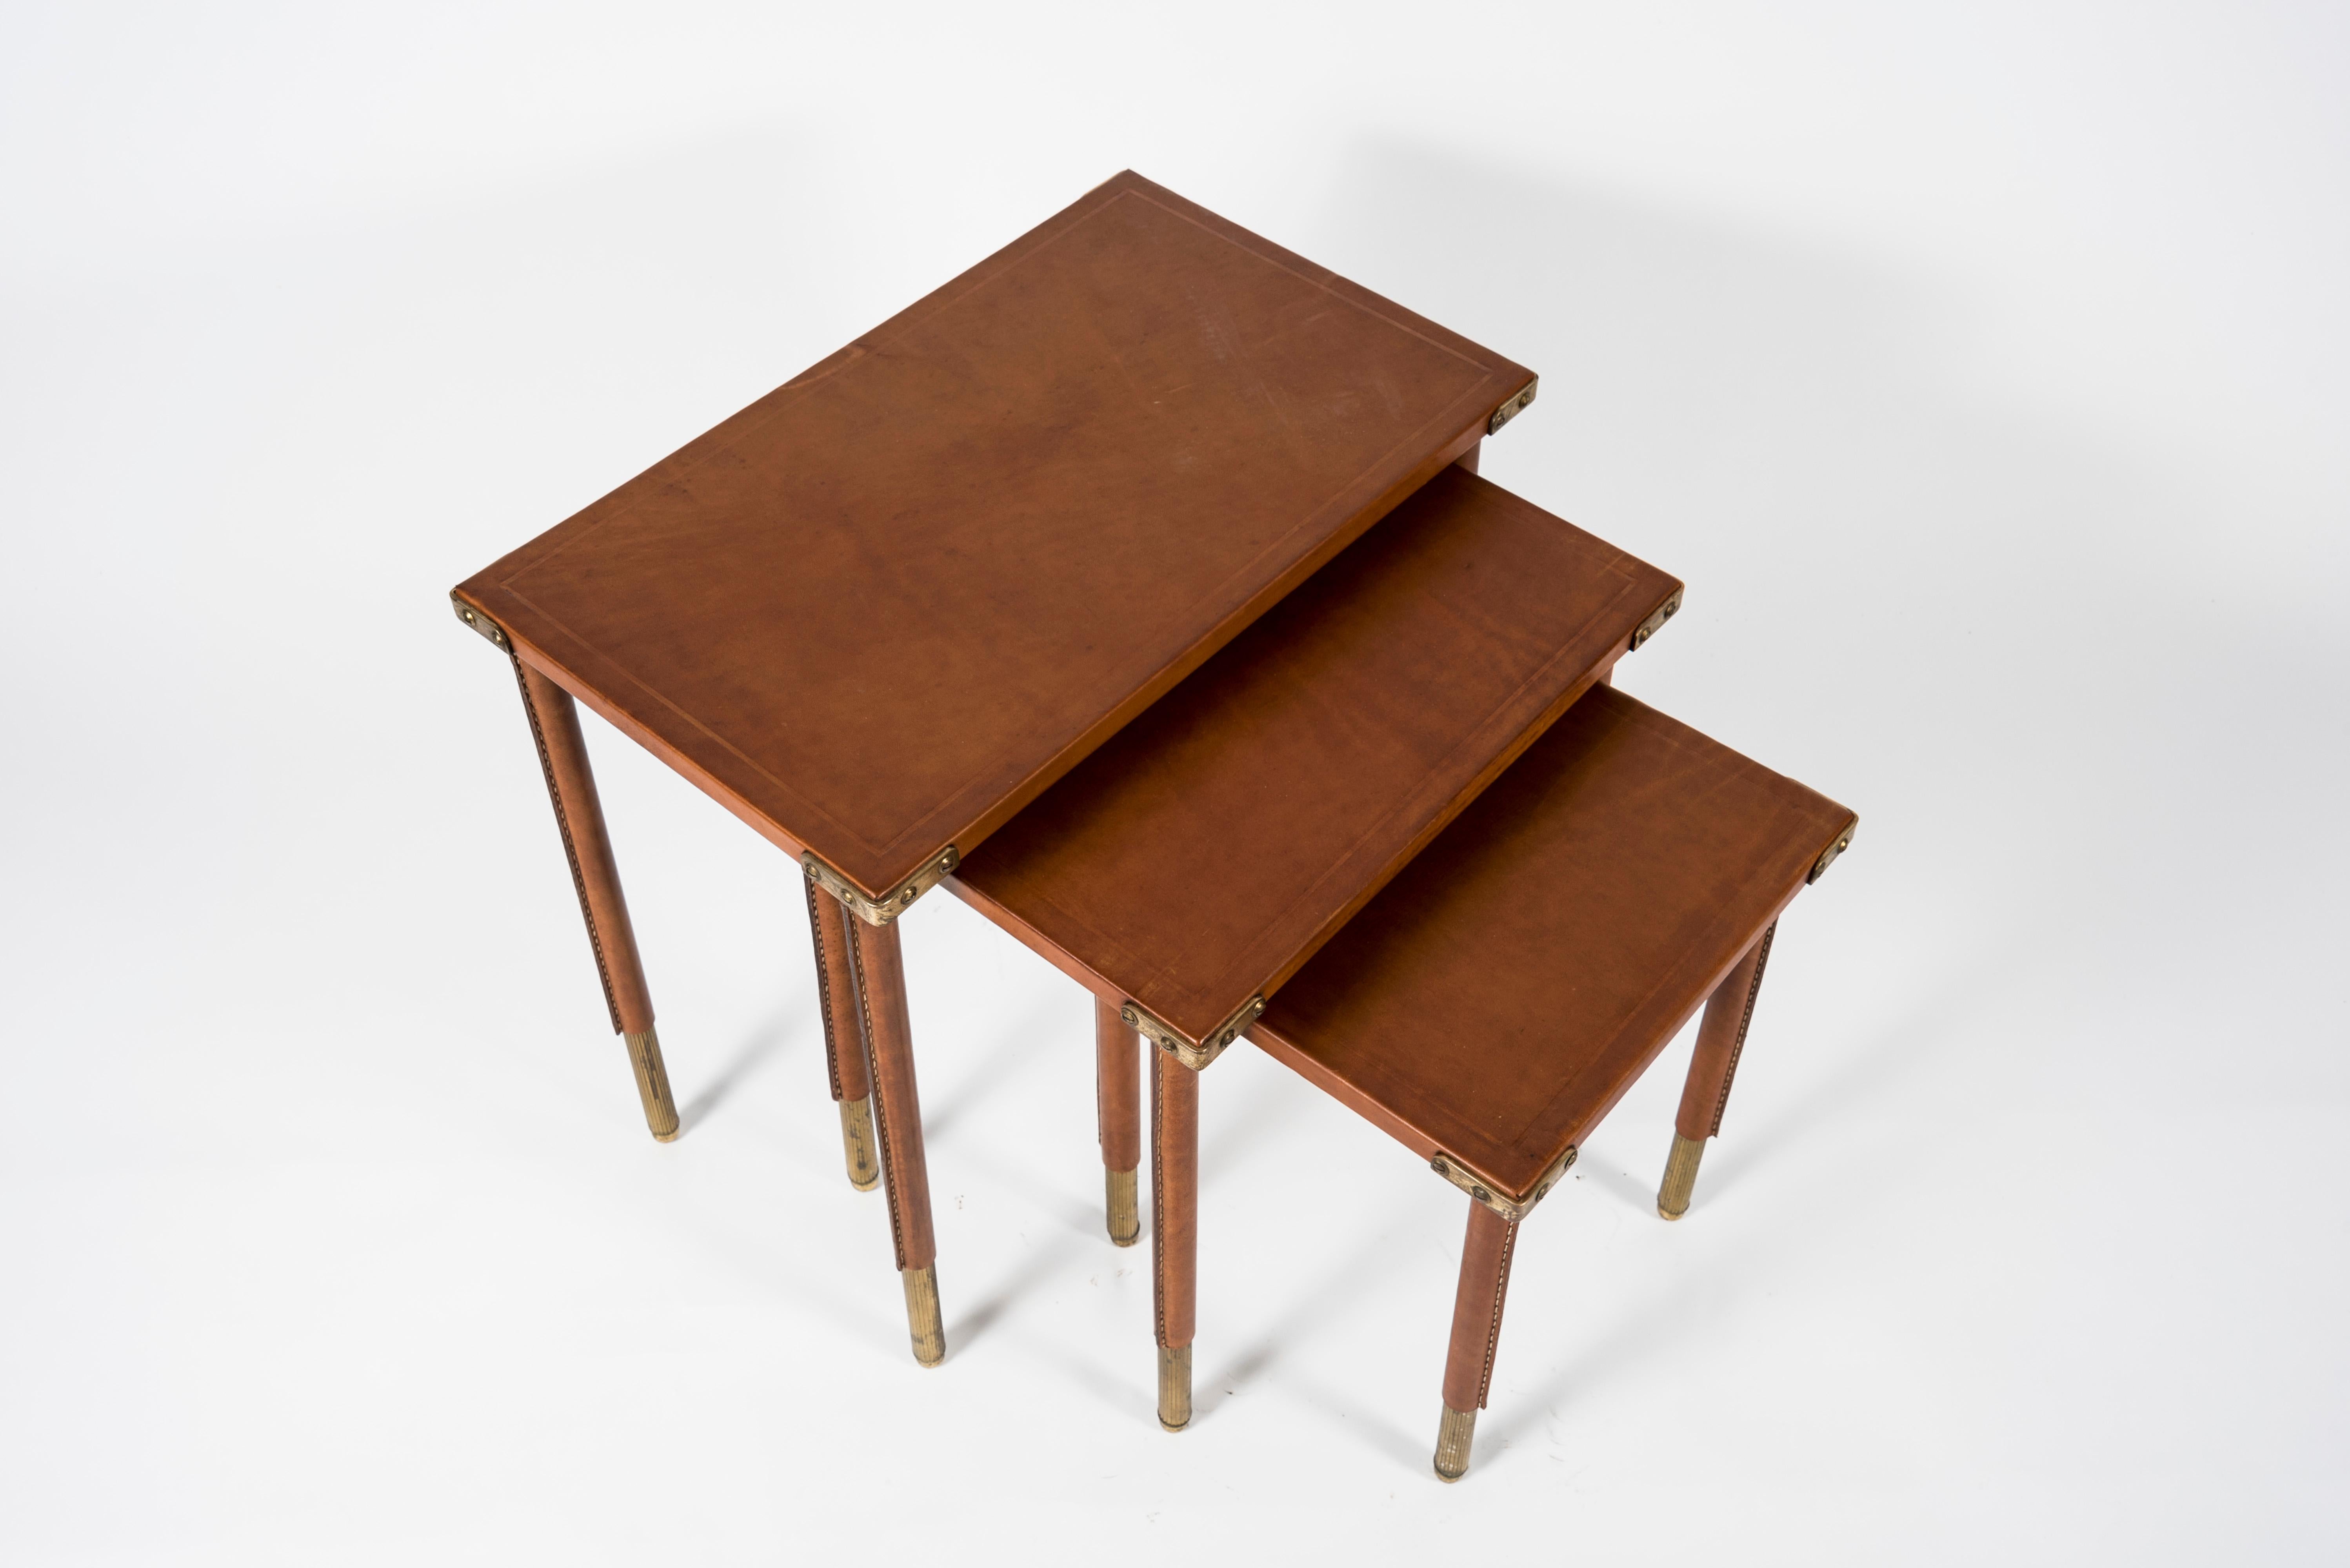 Rare Set of 3 Nesting Tables in Stitched Leather by Jacques Adnet 1